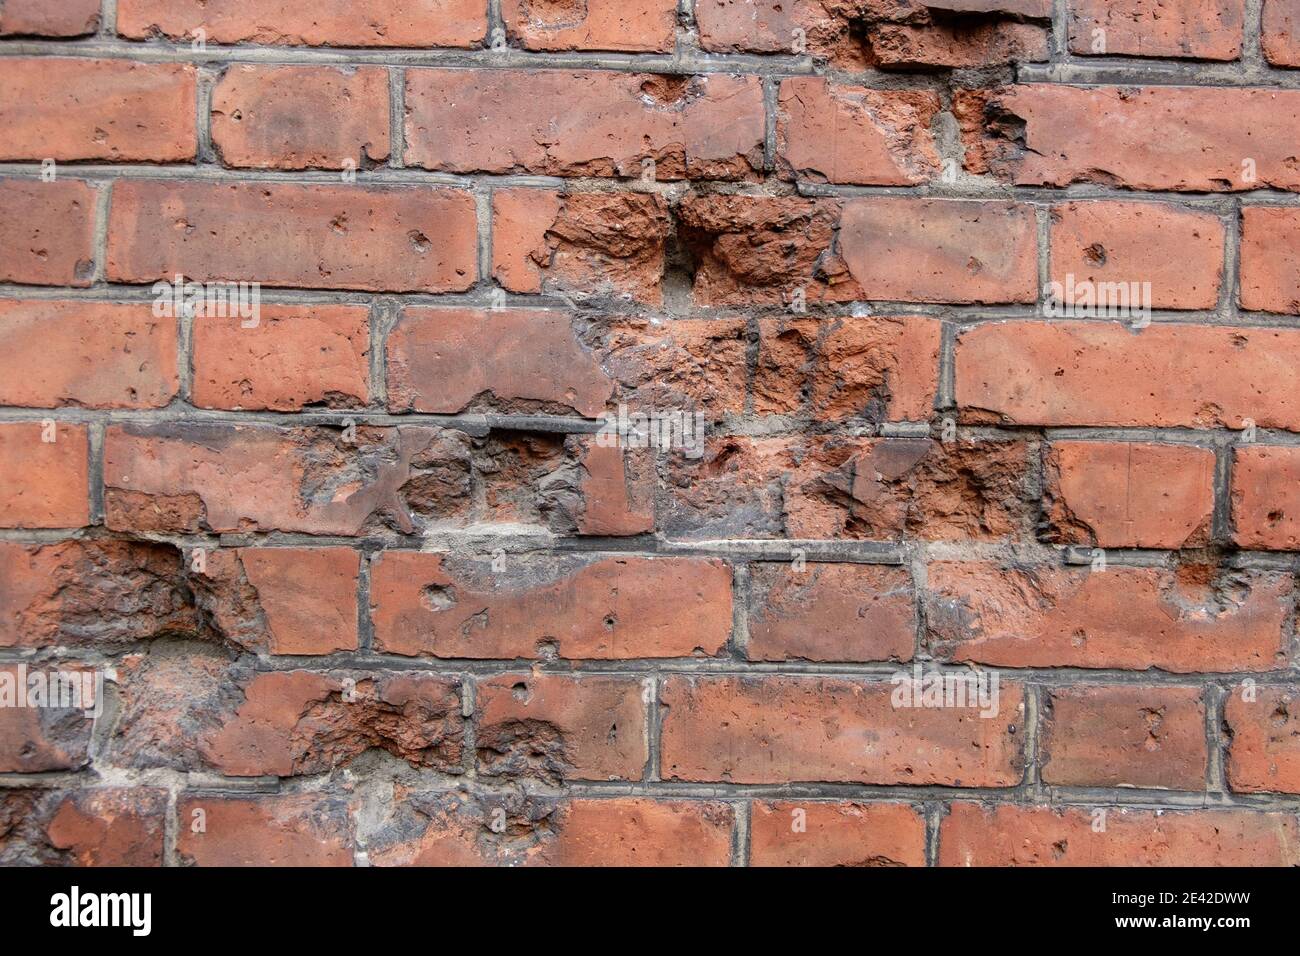 Dark brown old bricks wall with parts knocked out from bullets Stock Photo